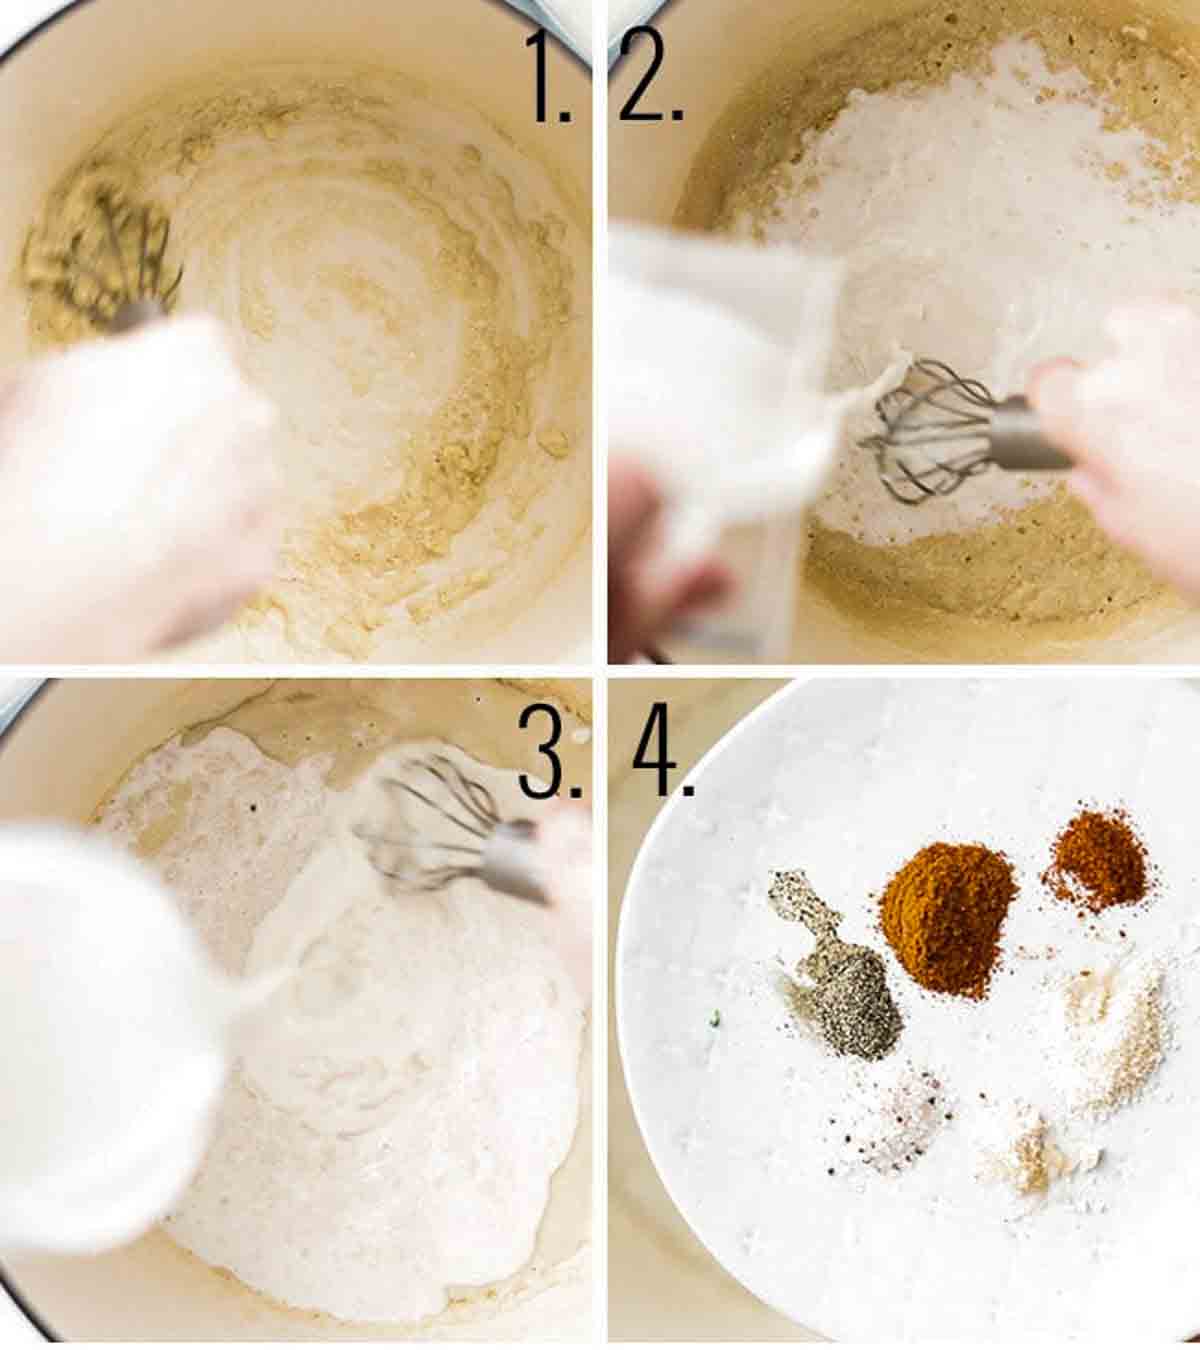 Collage showing how to make a spiced cheese sauce.